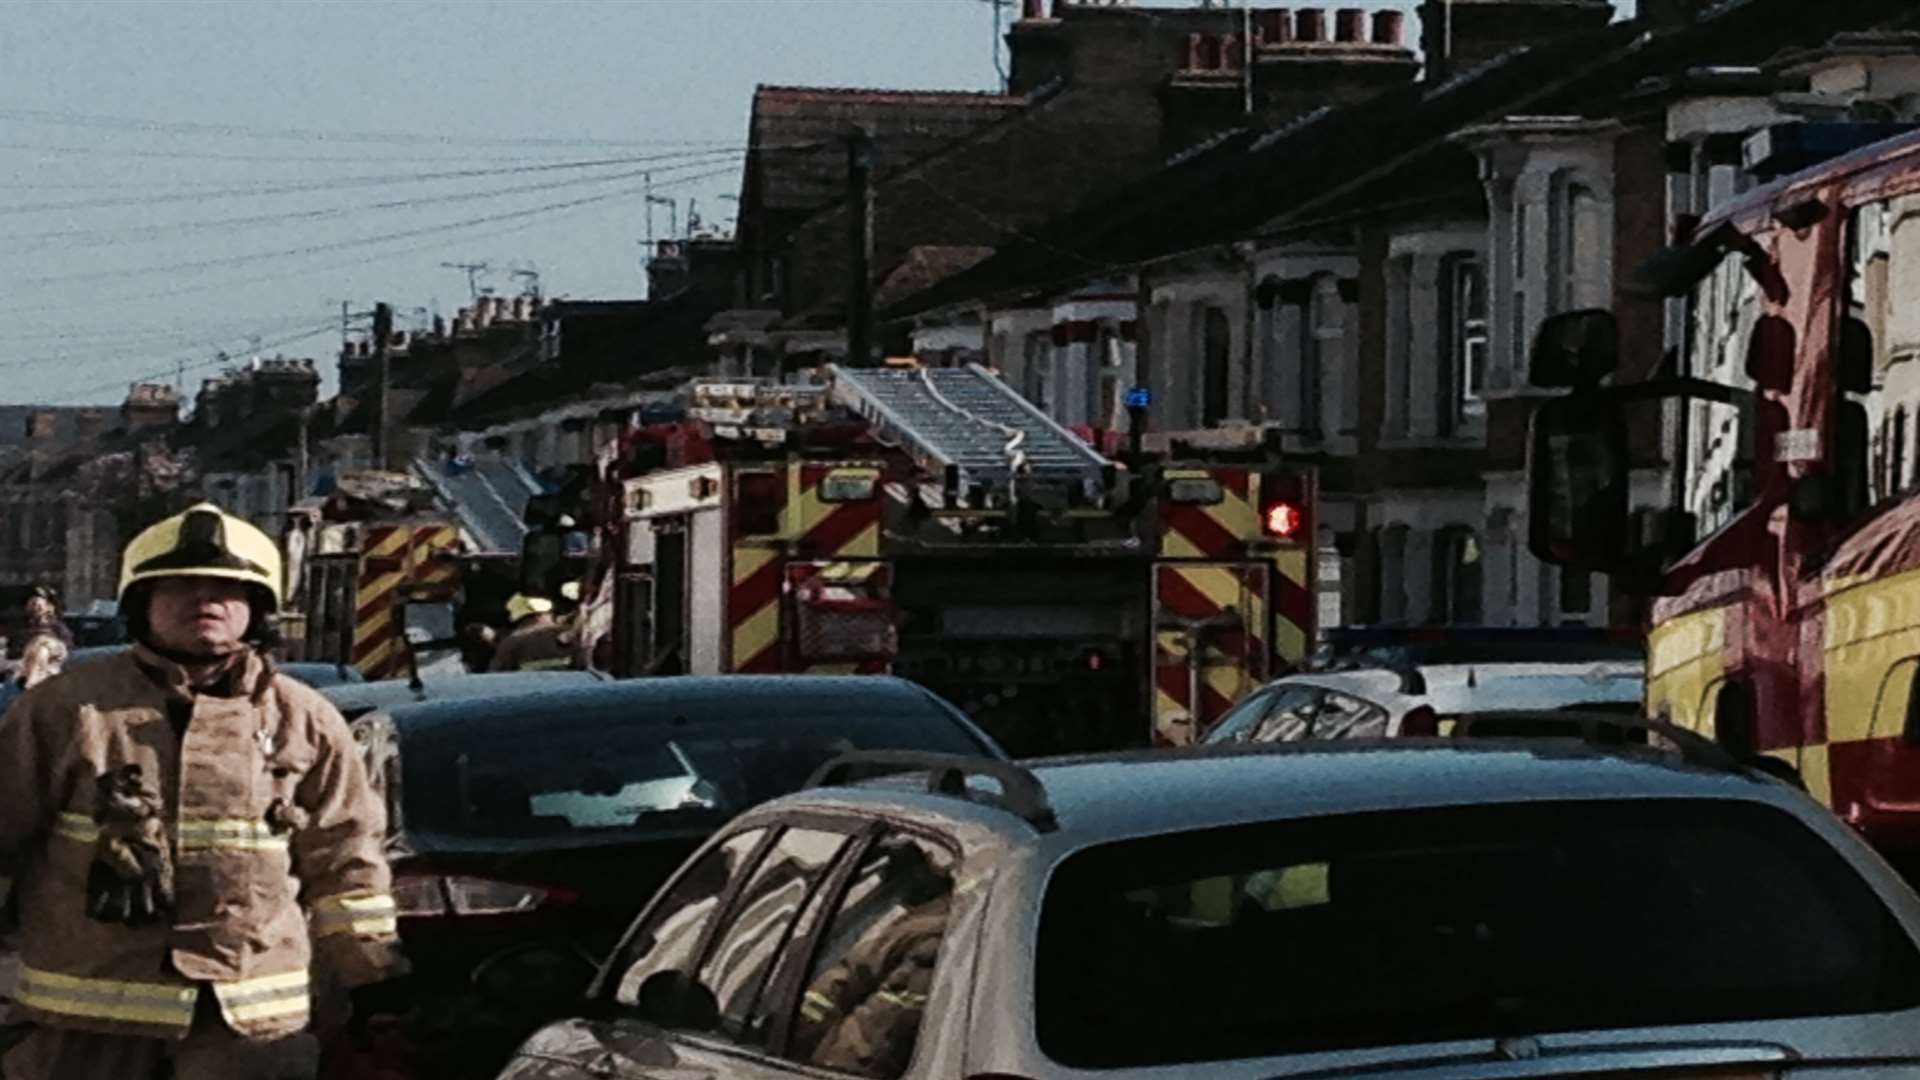 Firefighters at the scene of the blaze